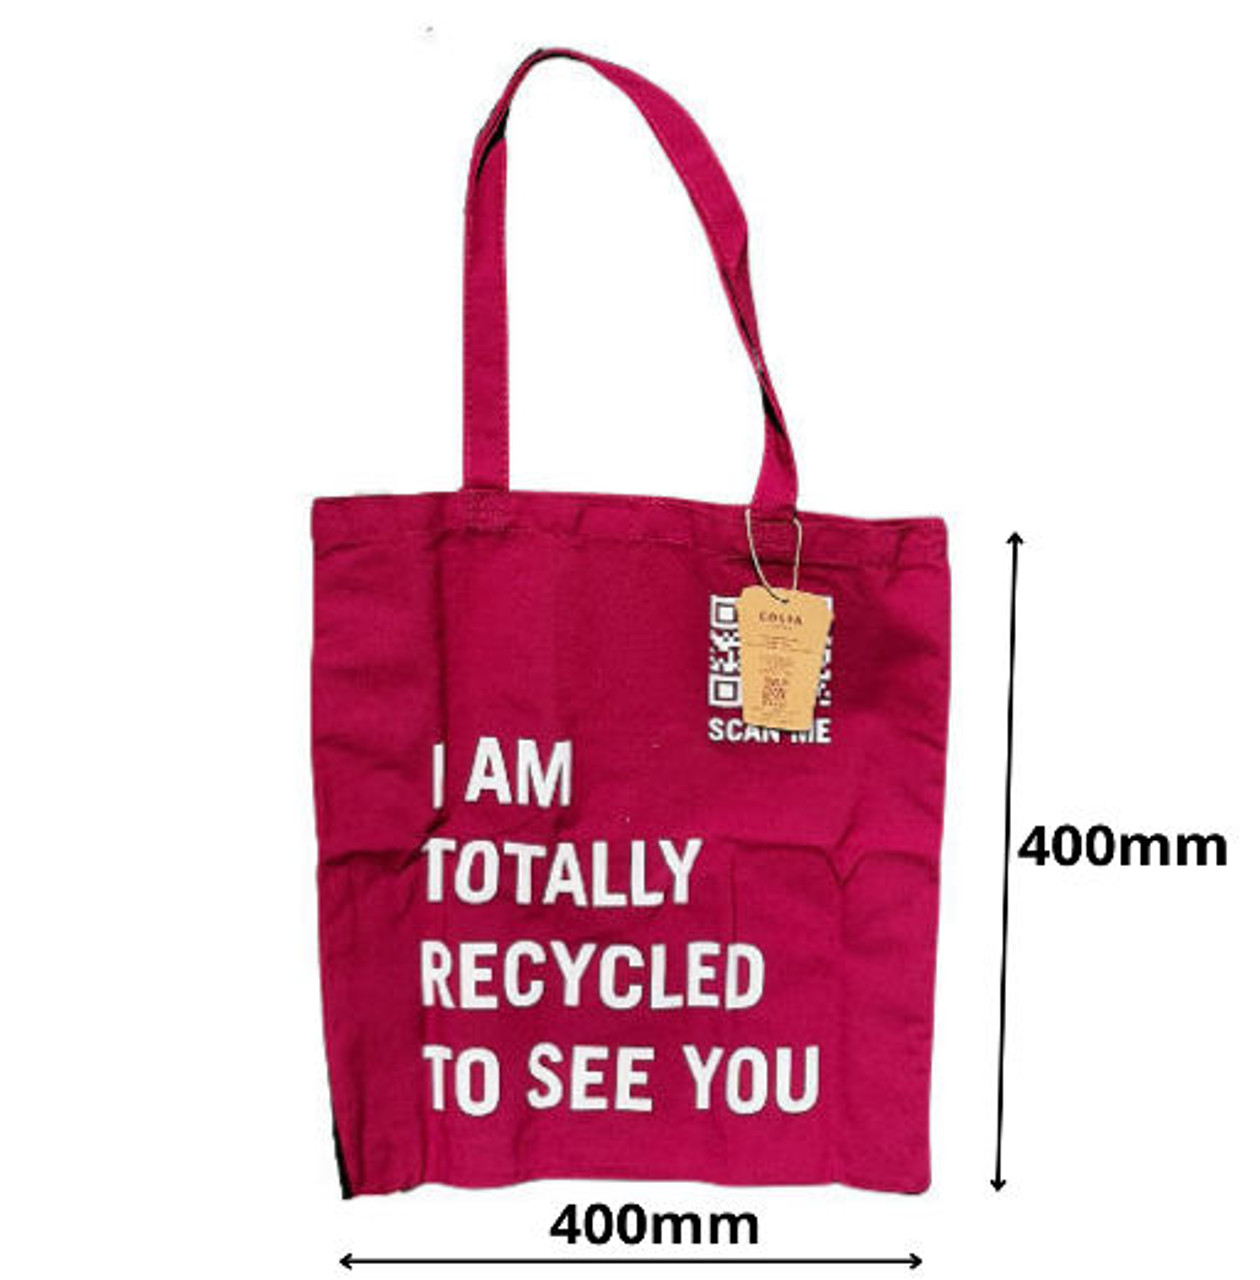 Costa Coffee Bag for life 16" x 16" with Loop Handle